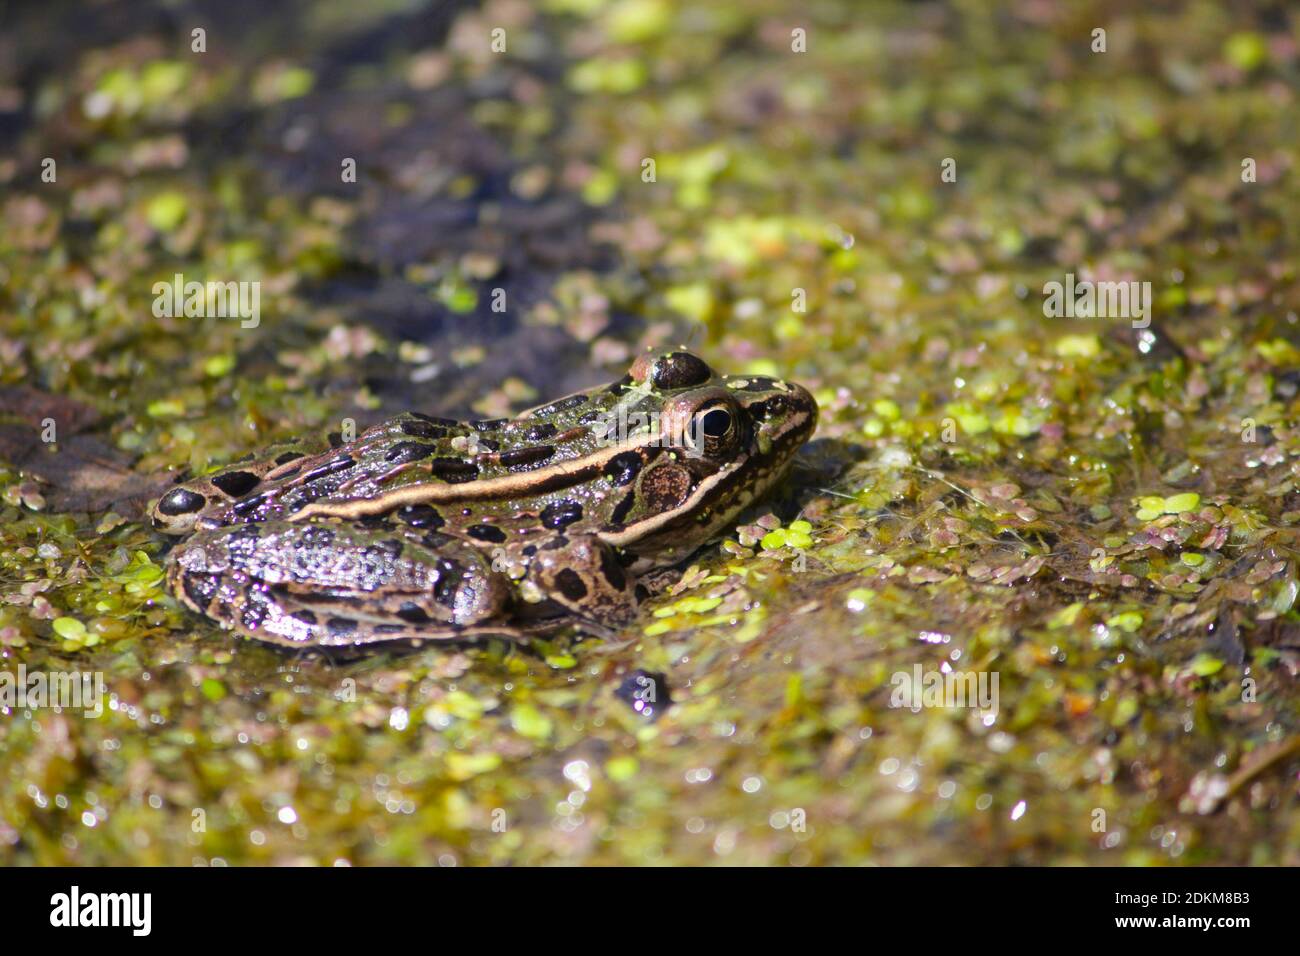 A frog in the mud. Stock Photo